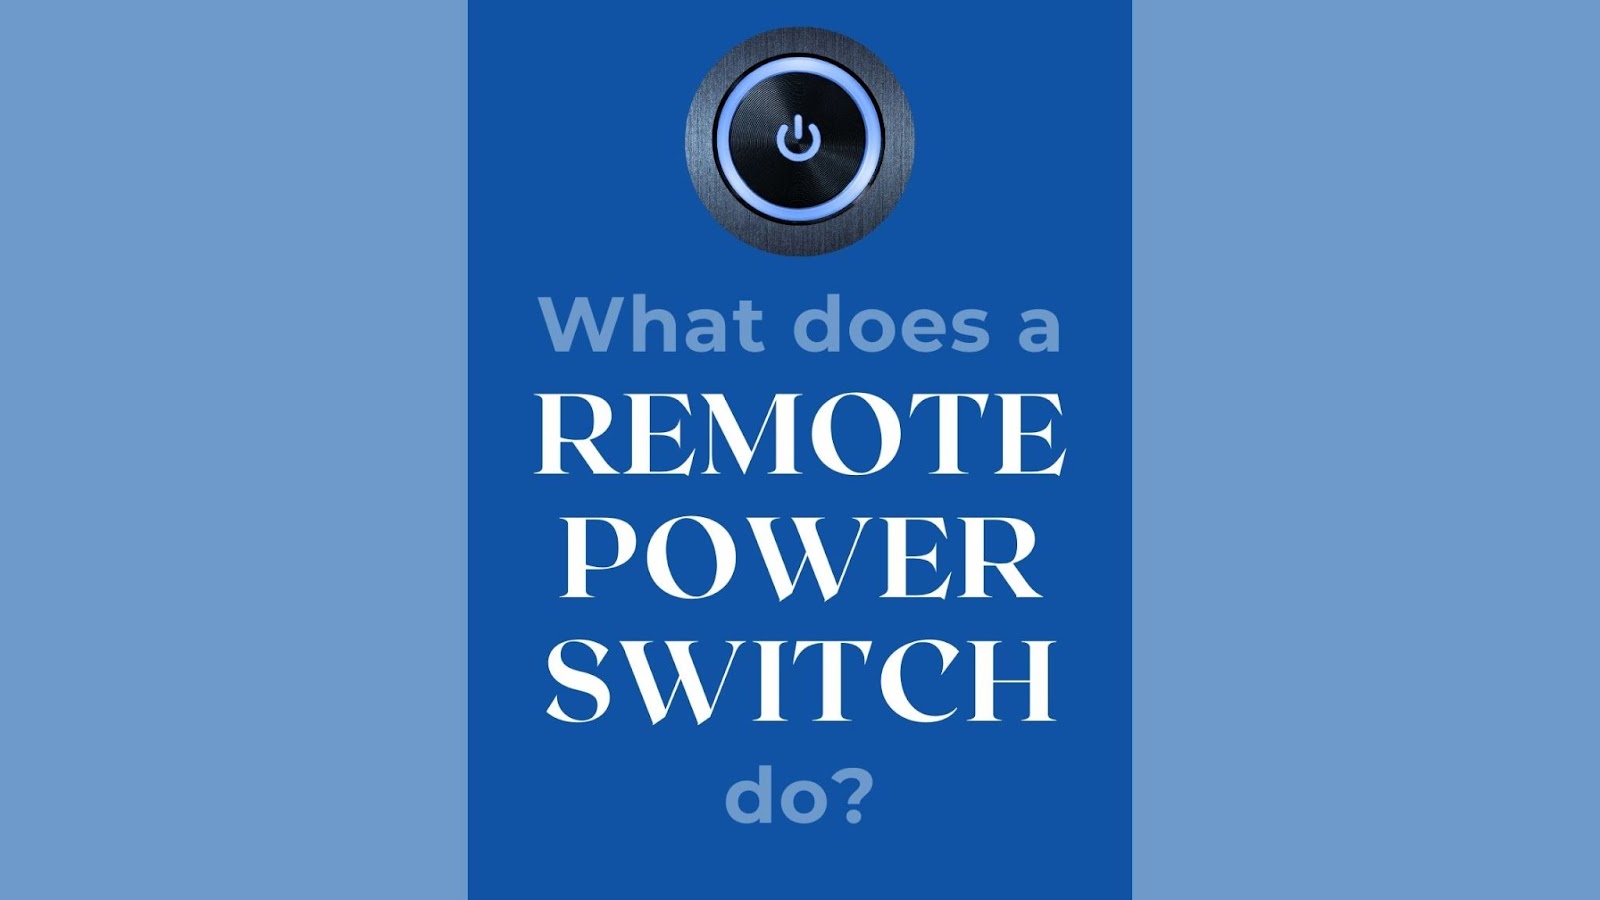 WHAT DOES A REMOTE POWER SWITCH DO?